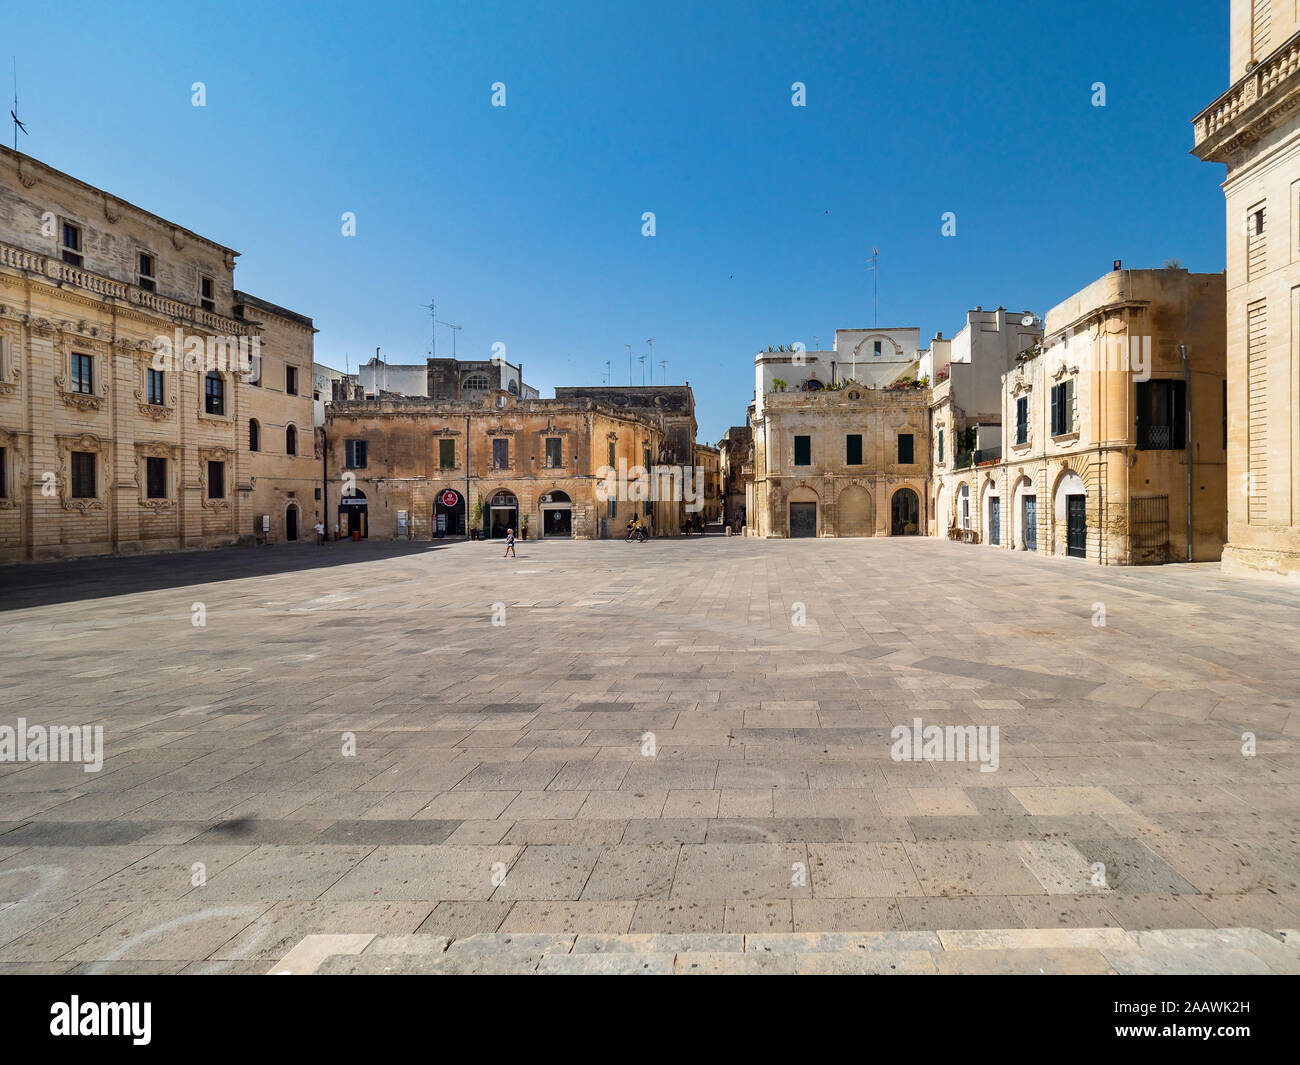 View of old residential buildings against clear blue sky in Lecce, Italy Stock Photo